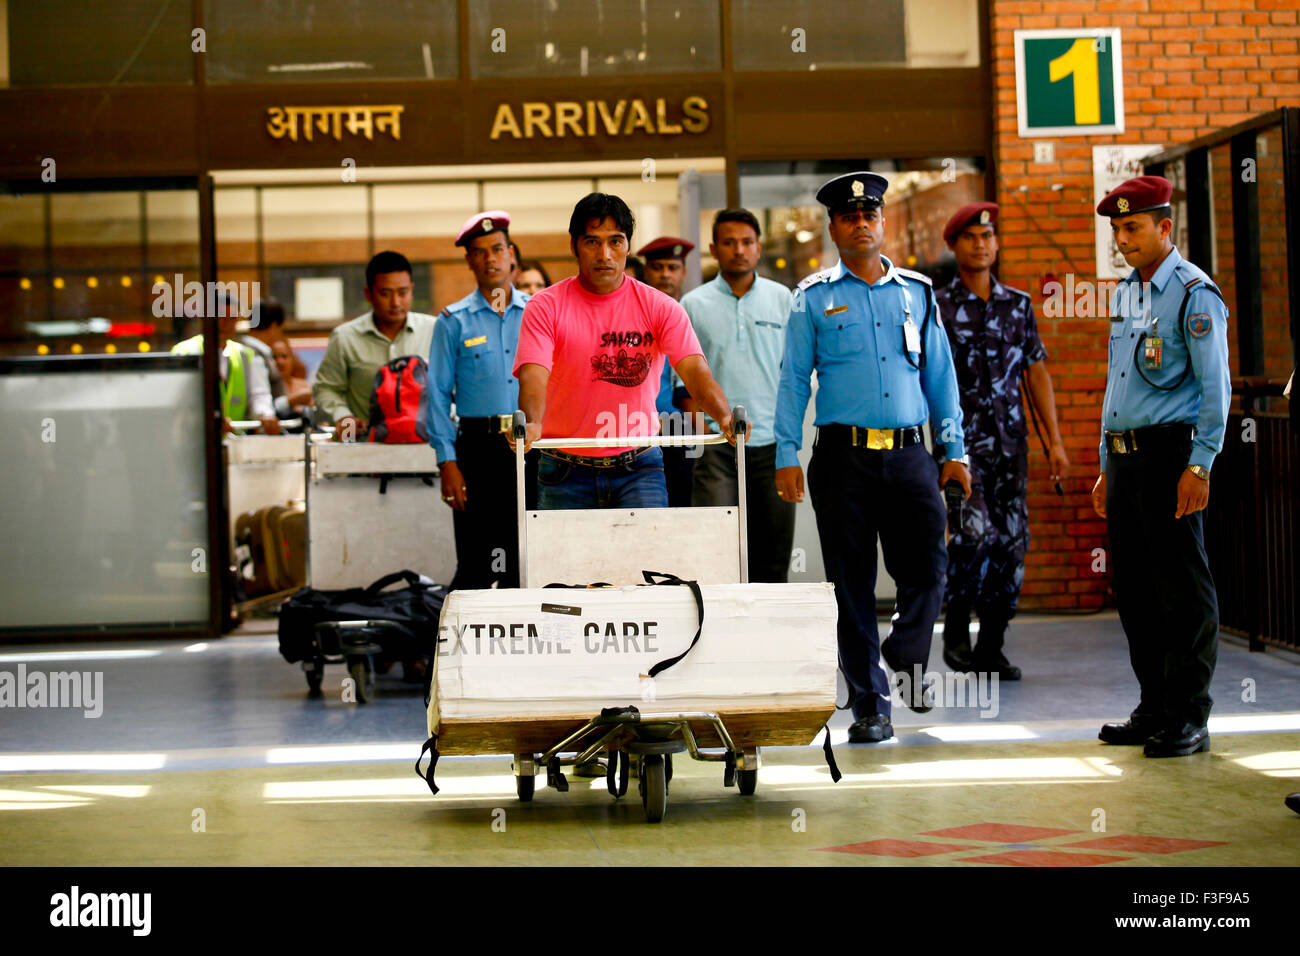 Kathmandu, Nepal. 2nd Oct, 2015. Dolakh Dangi (1st L, front), nephew of the world's shortest man Chandra Bahadur Dangi, walks with Chandra Bahadur's body at an airport in Kathmandu, Nepal, Oct. 2, 2015. Chandra Bahadur Dangi, who was 54.6 cm (21.5 inches) tall according to Guinness World Records, died on Sept. 3 at the age of 75. His body was kept for the last tribute on Oct. 6. © Pratap Thapa/Xinhua/Alamy Live News Stock Photo